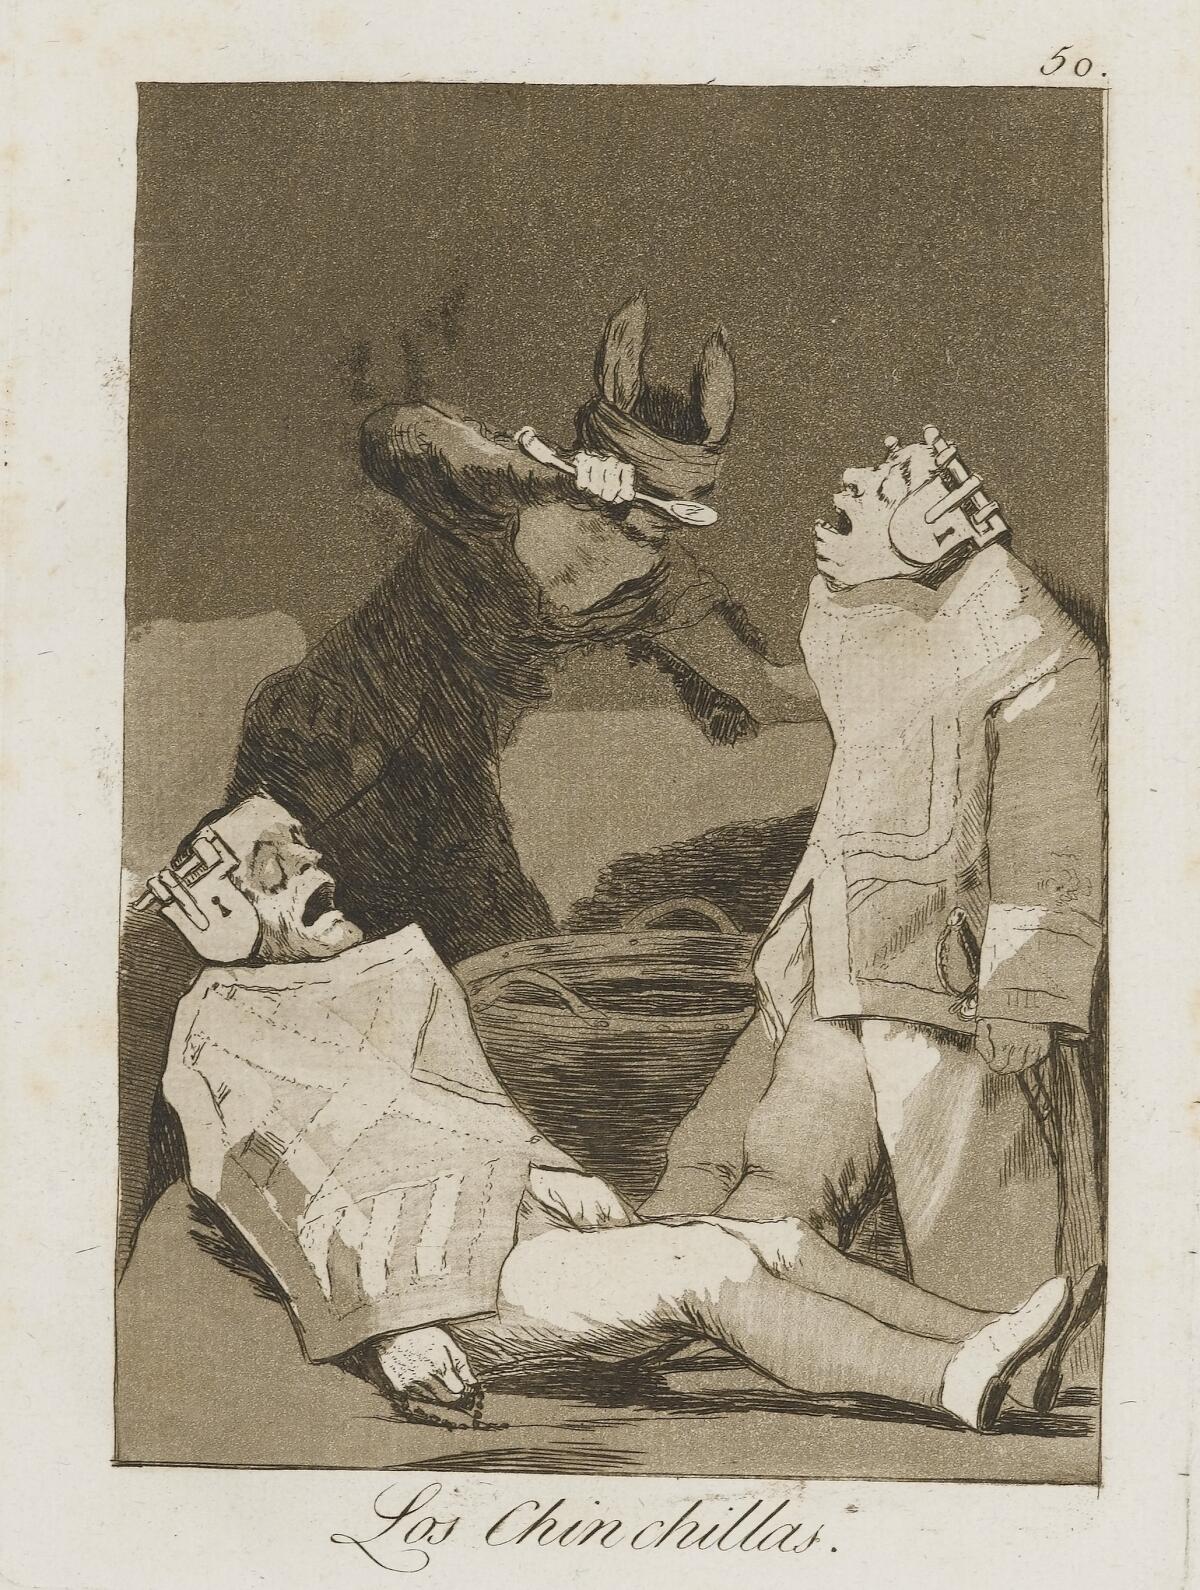 An aquatint drawing of a donkey-eared humanoid preparing to spoon-feed a standing man as another man lies nearby